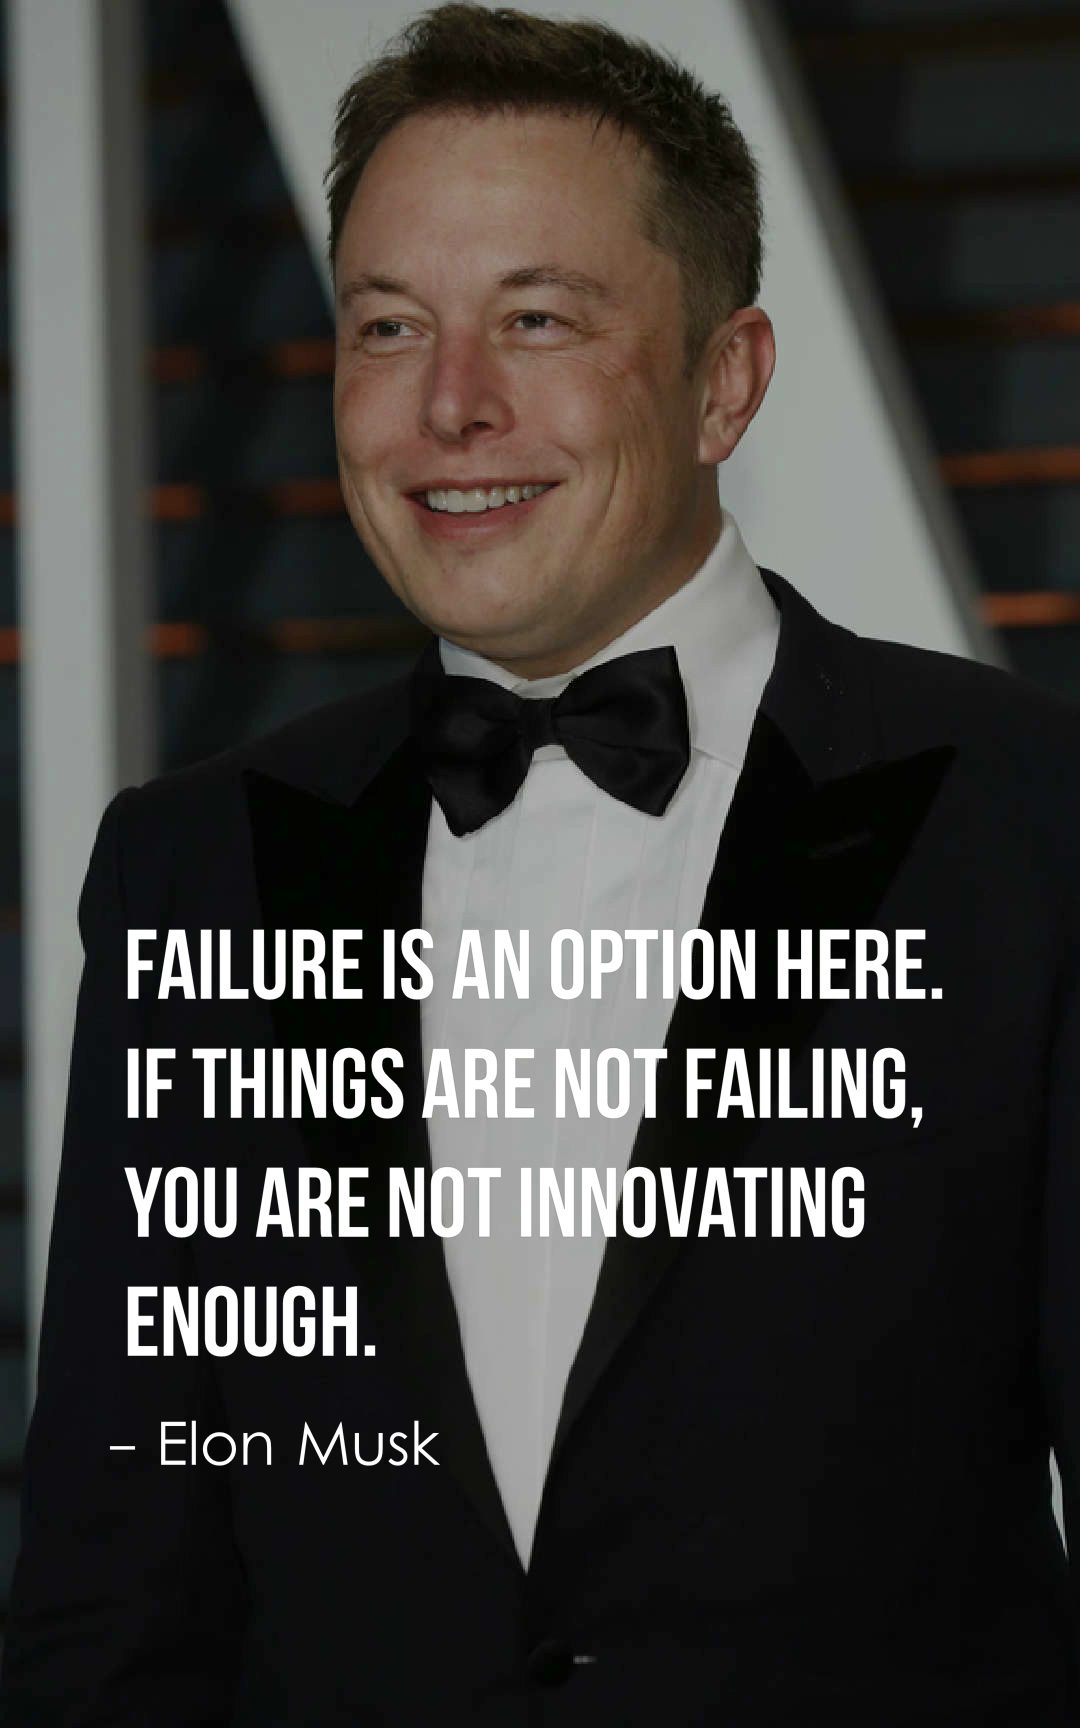 Failure is an option here. If things are not failing, you are not innovating enough.